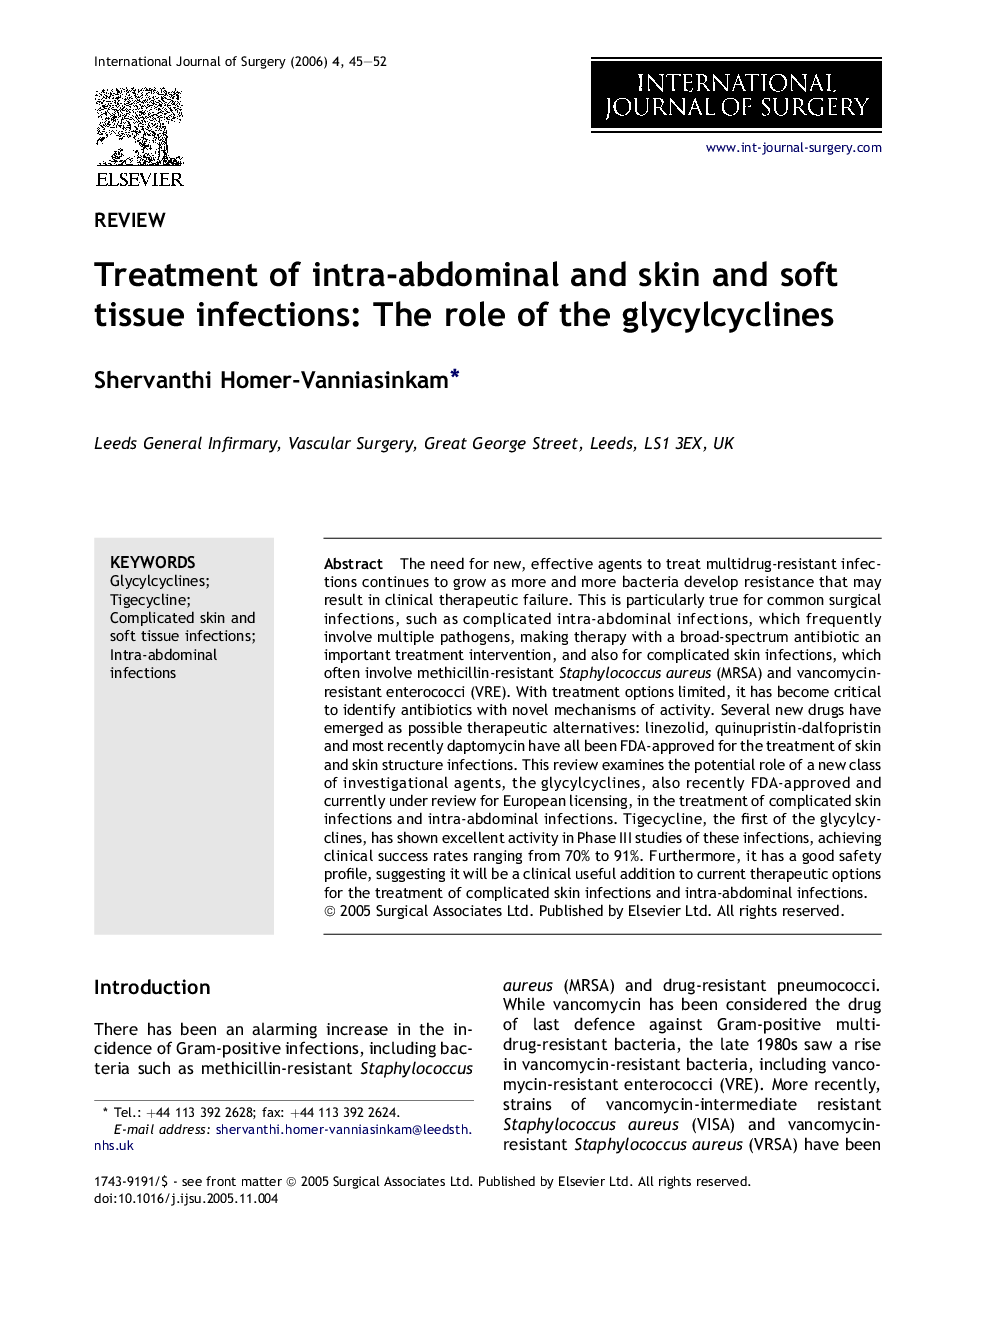 Treatment of intra-abdominal and skin and soft tissue infections: The role of the glycylcyclines